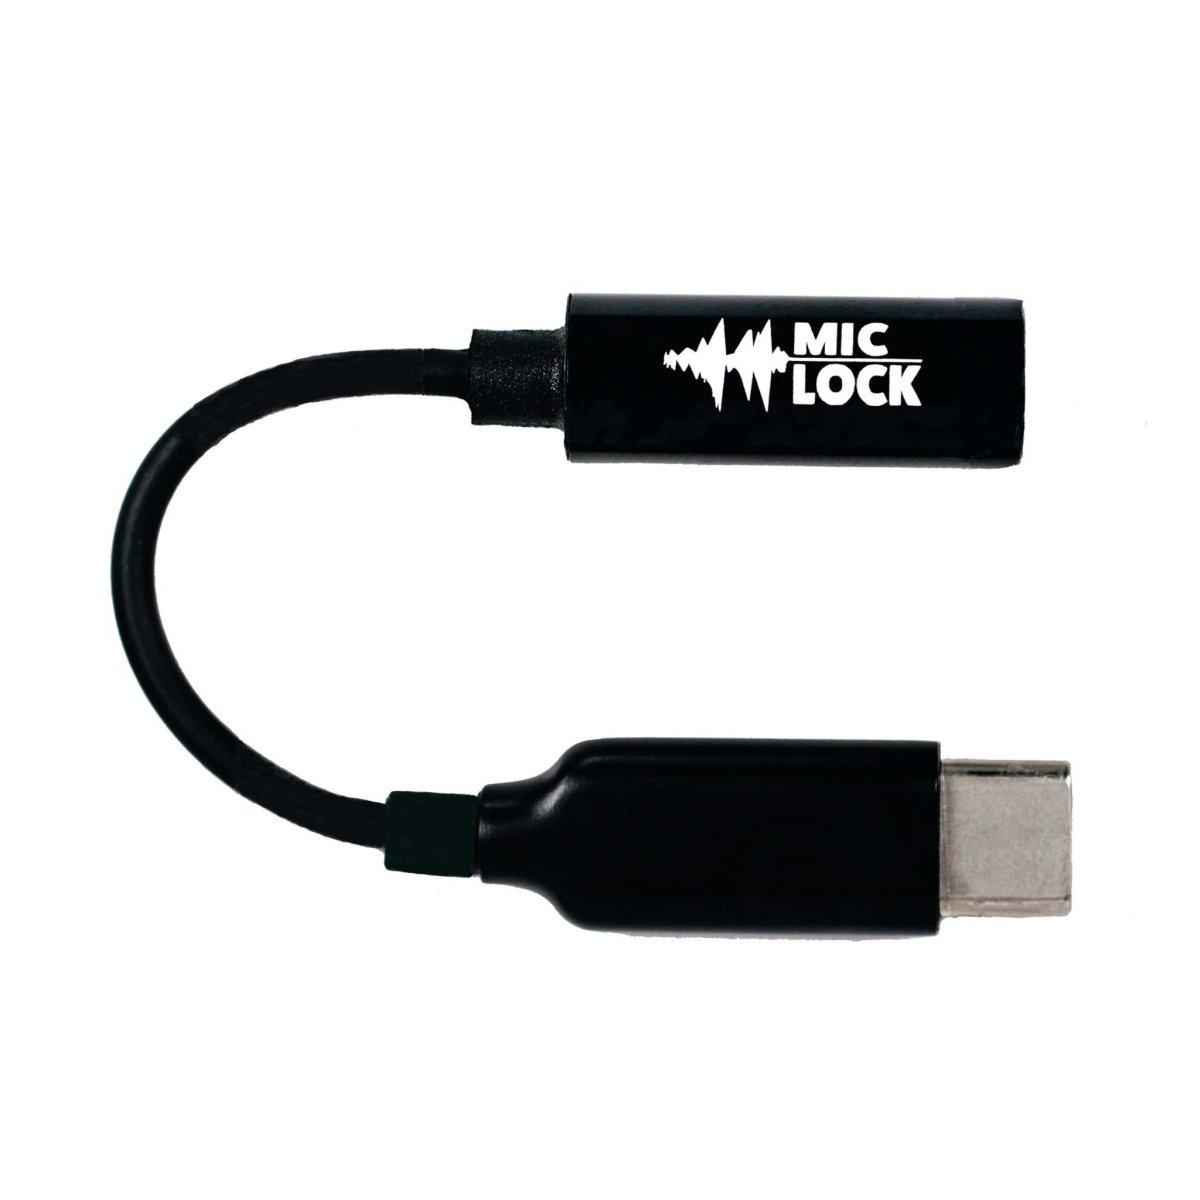 Mic-Lock Android Privacy Action Bundle - Mic-Lock